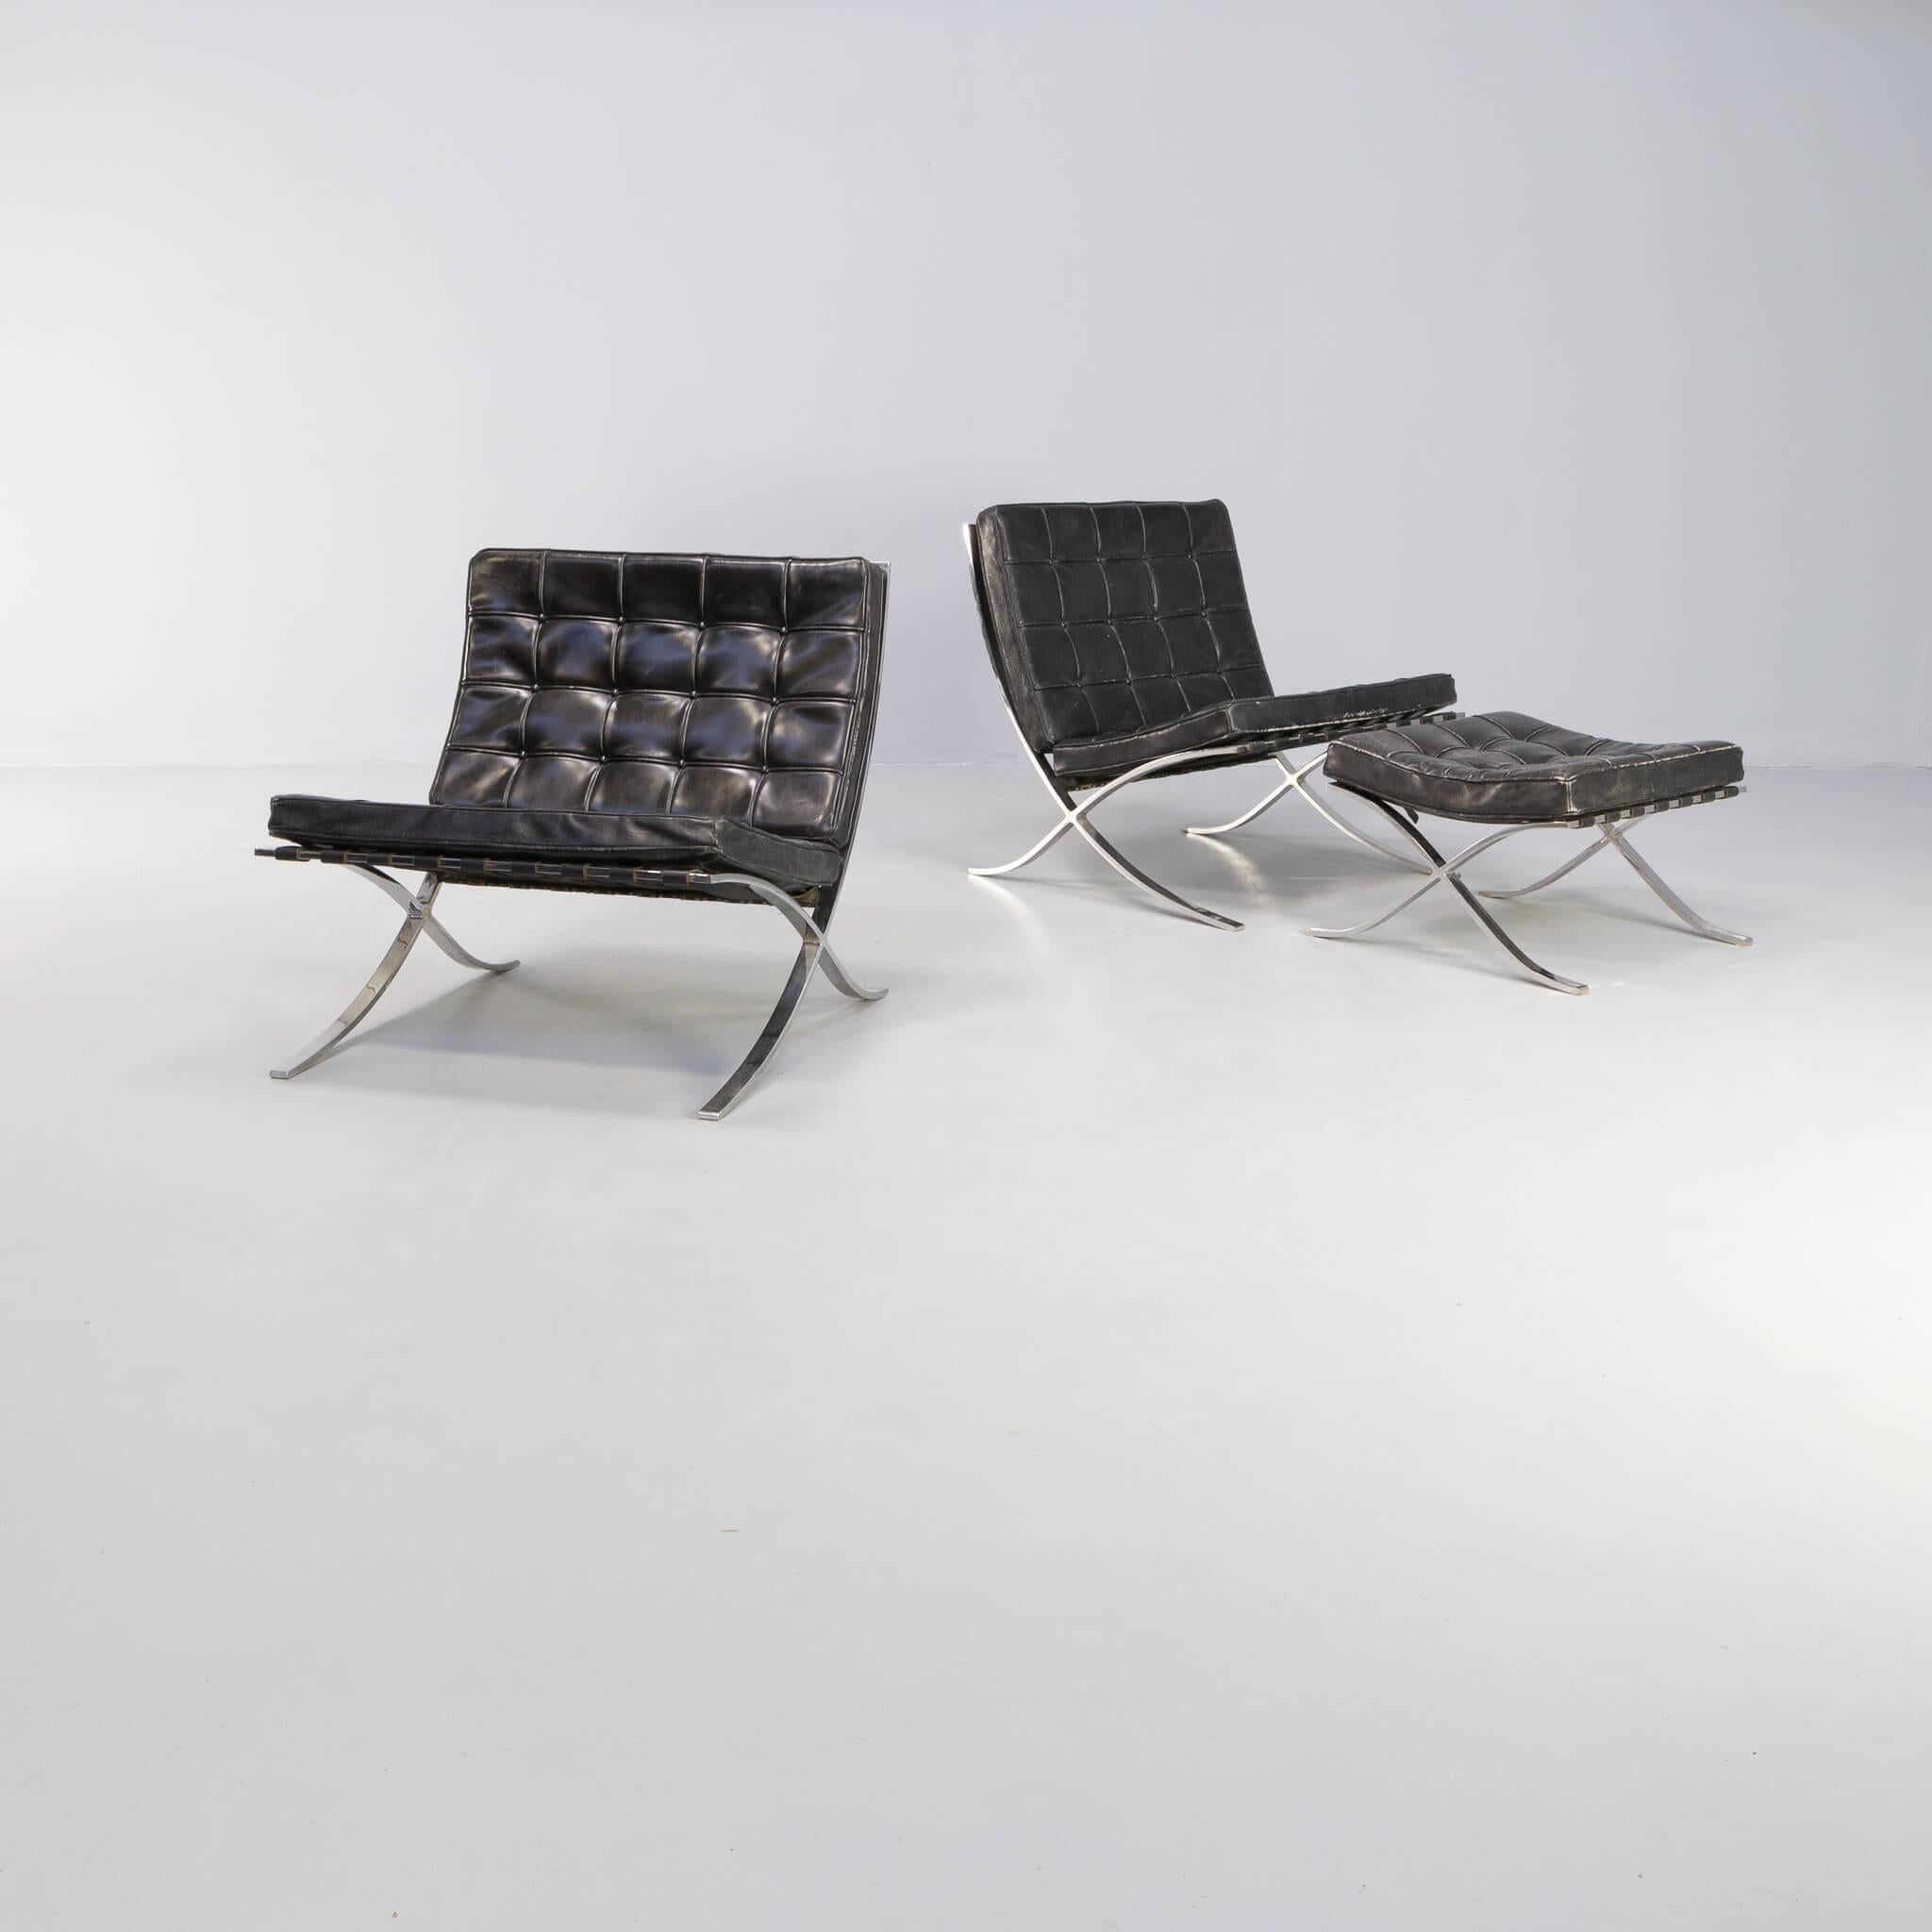 This chair (model 250L) was designed by Mies van der Rohe together with interior designer Lilly Reich for the German pavilion of the 1929 World Fair in Barcelona. This chair was also available with a ottoman, like this set has one, in the same